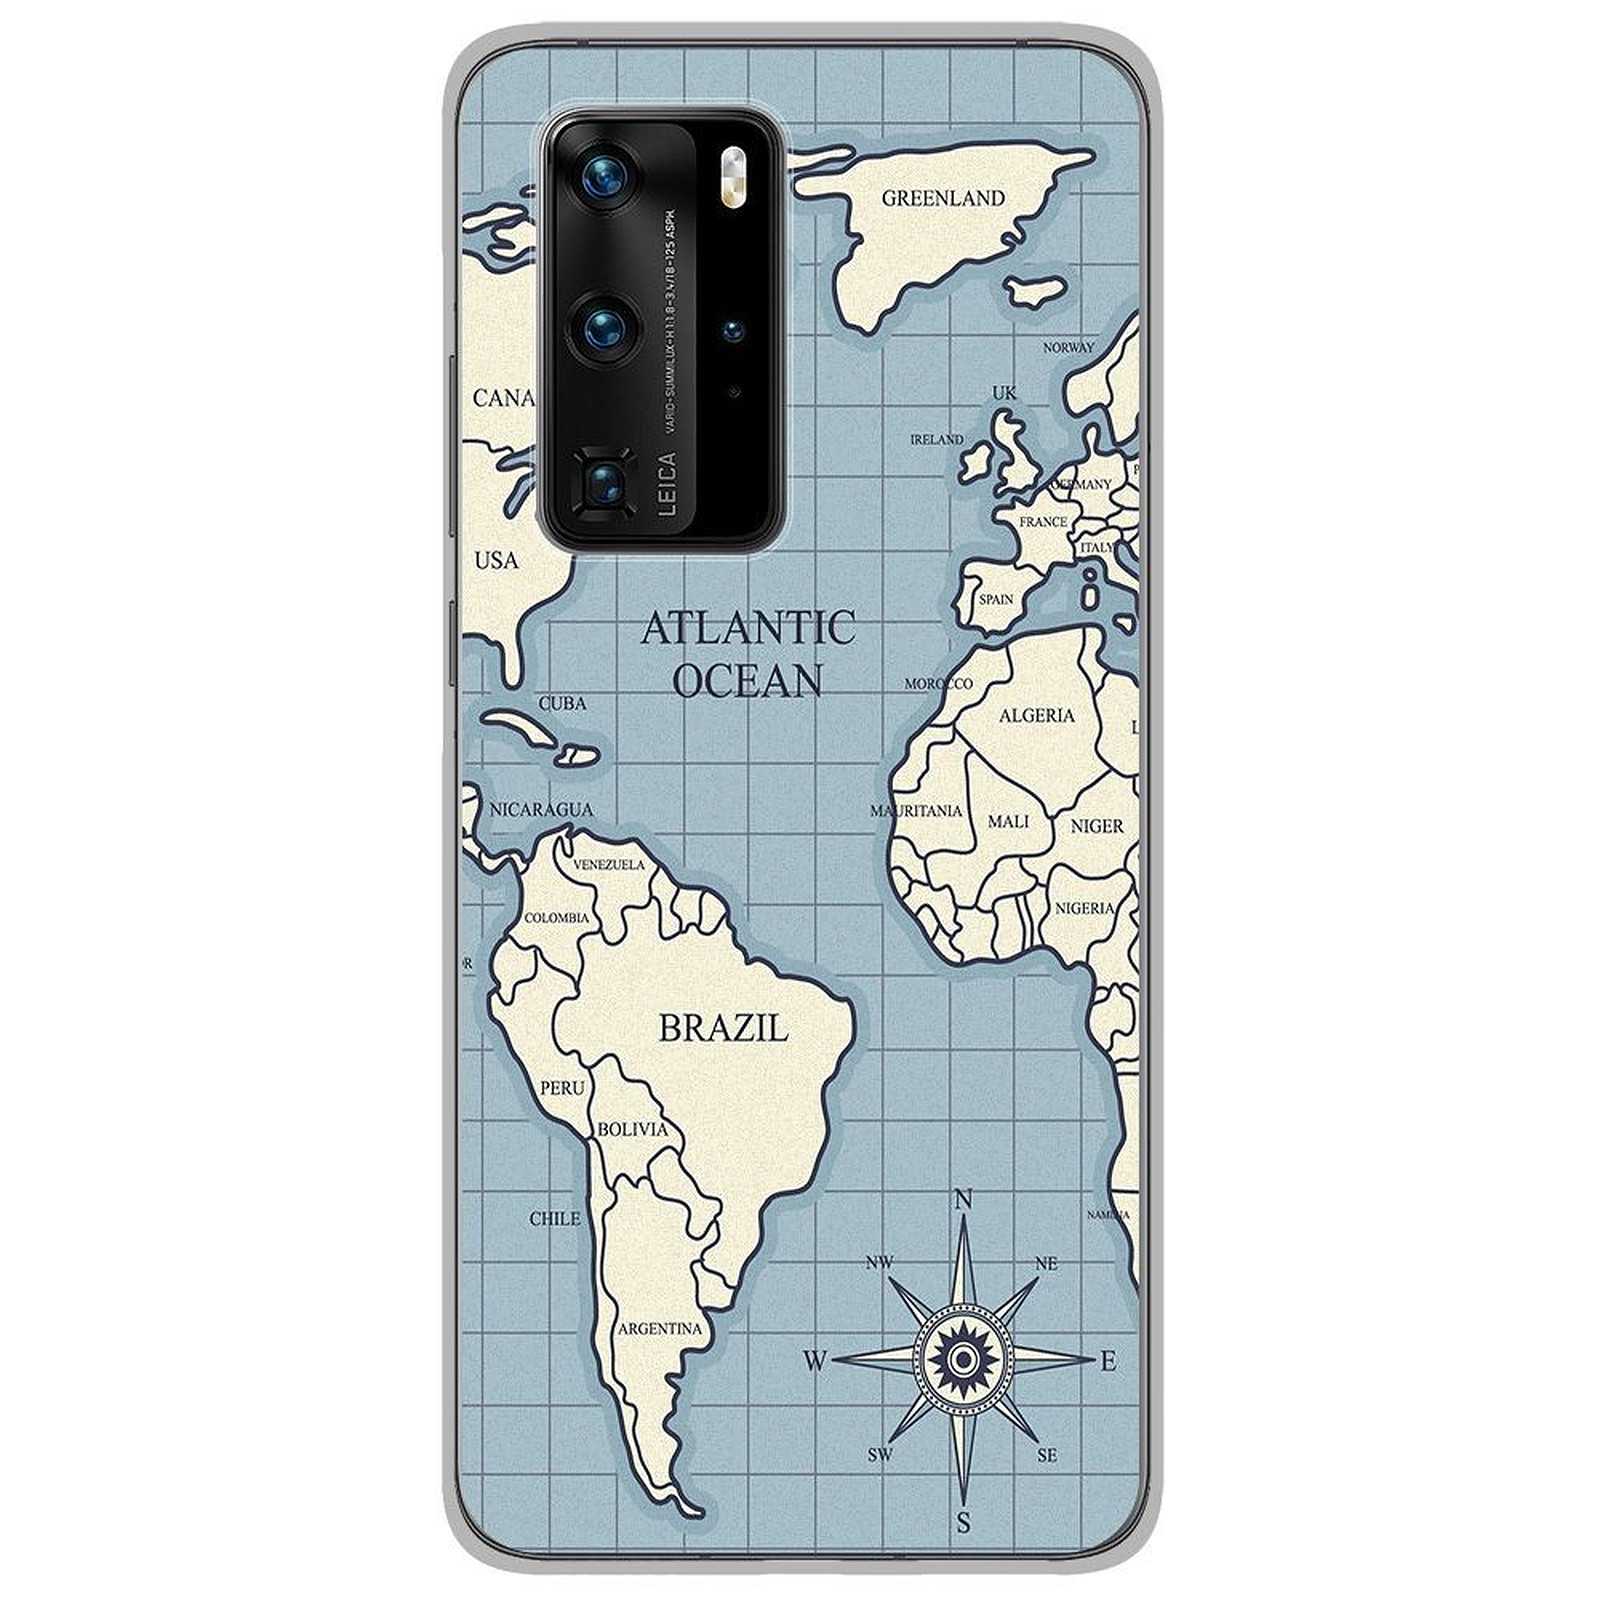 1001 Coques Coque silicone gel Huawei P40 Pro motif Map vintage - Coque telephone 1001Coques